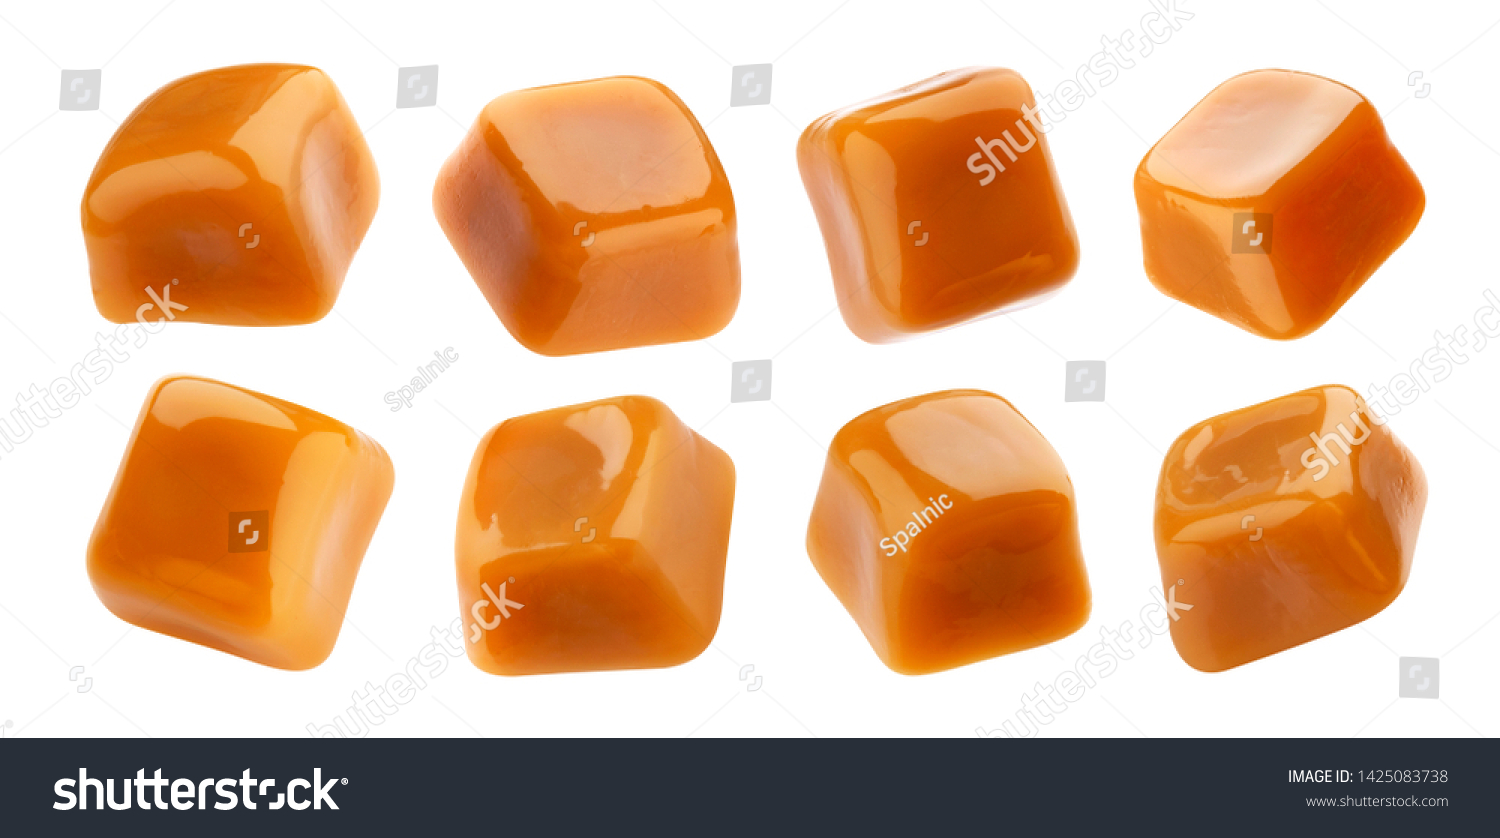 Toffee candy, caramel candies isolated on white background with clipping path, collection #1425083738